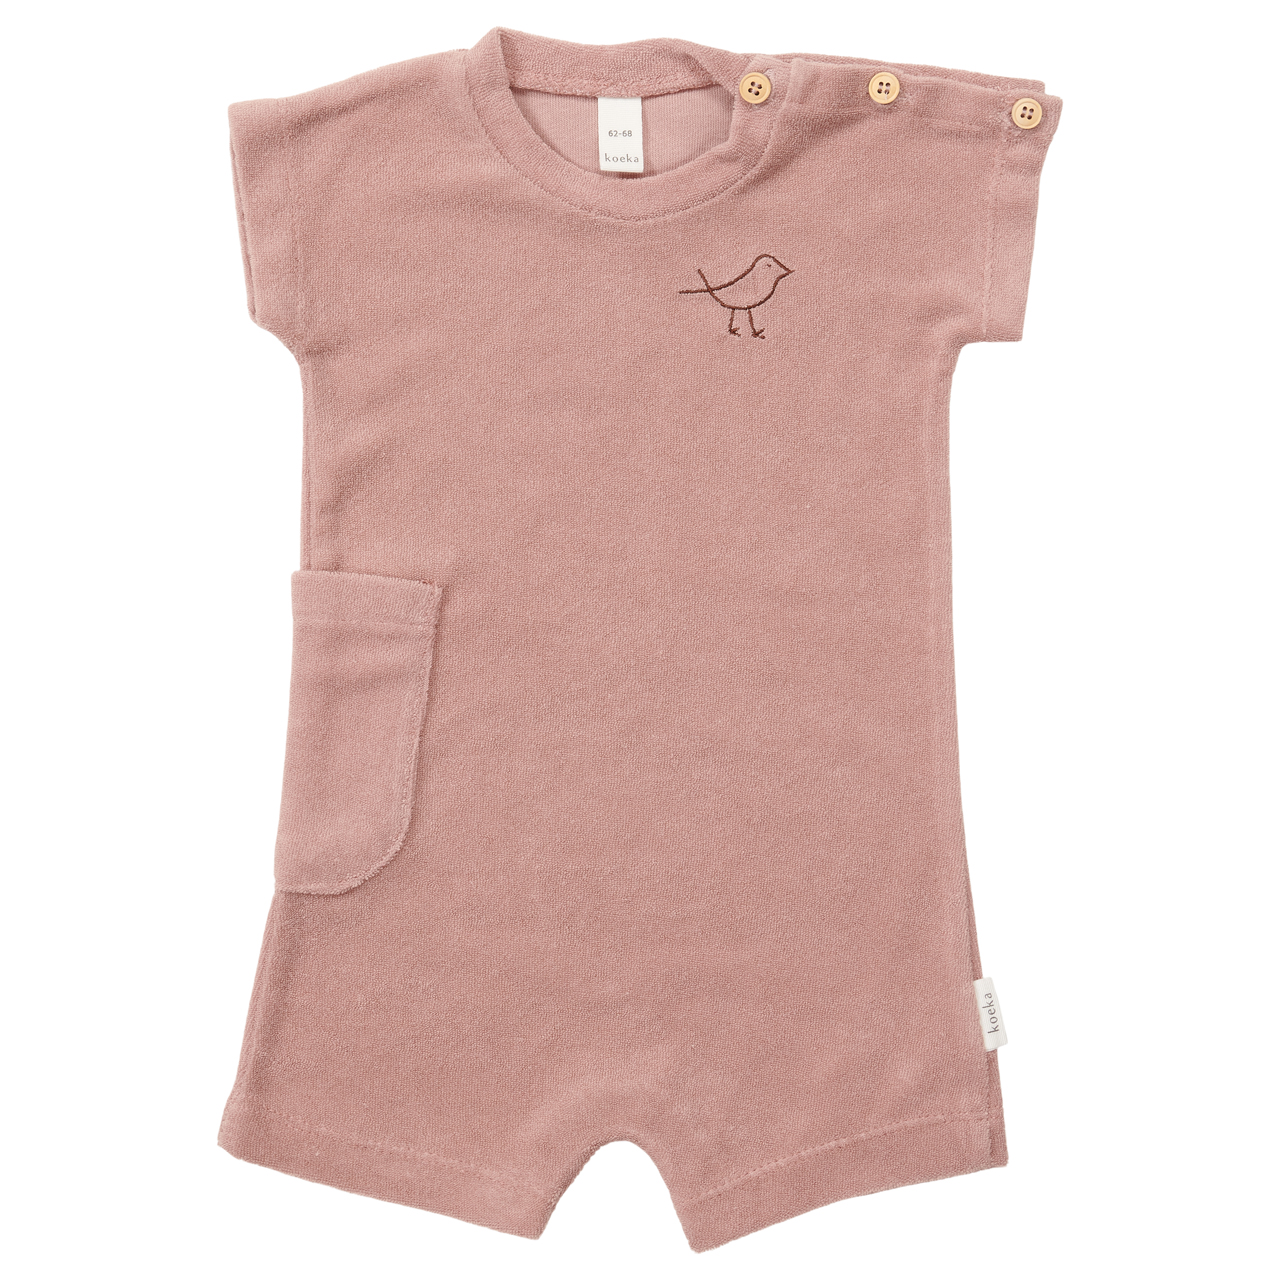 Baby one piece short Royan old pink